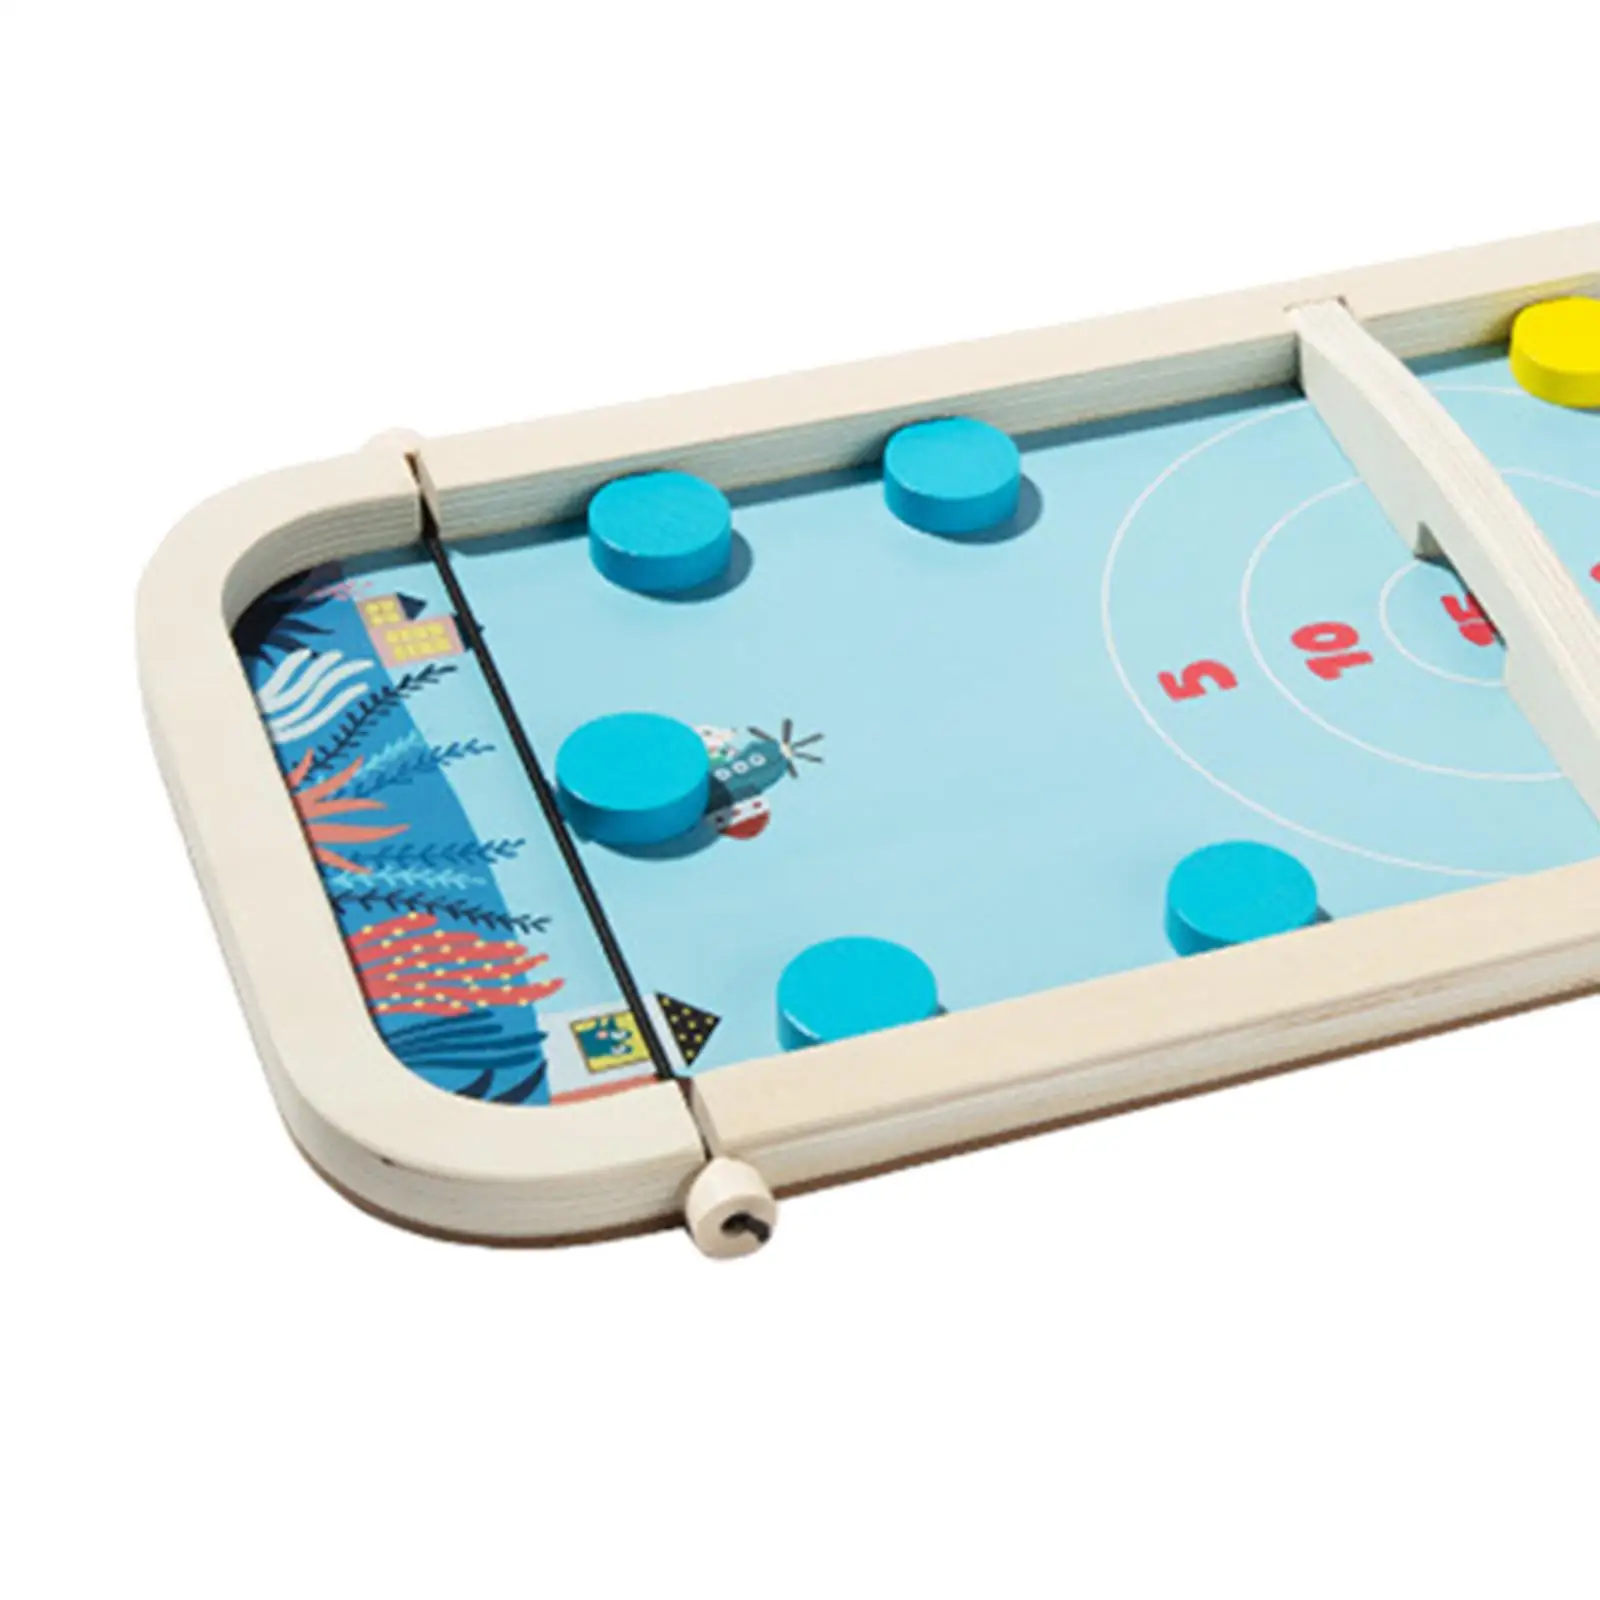 Puck Game Sport Board Game Paced Football Slingshot Game Desktop Battle Interactive Toy Foosball Winner Game for Family Game